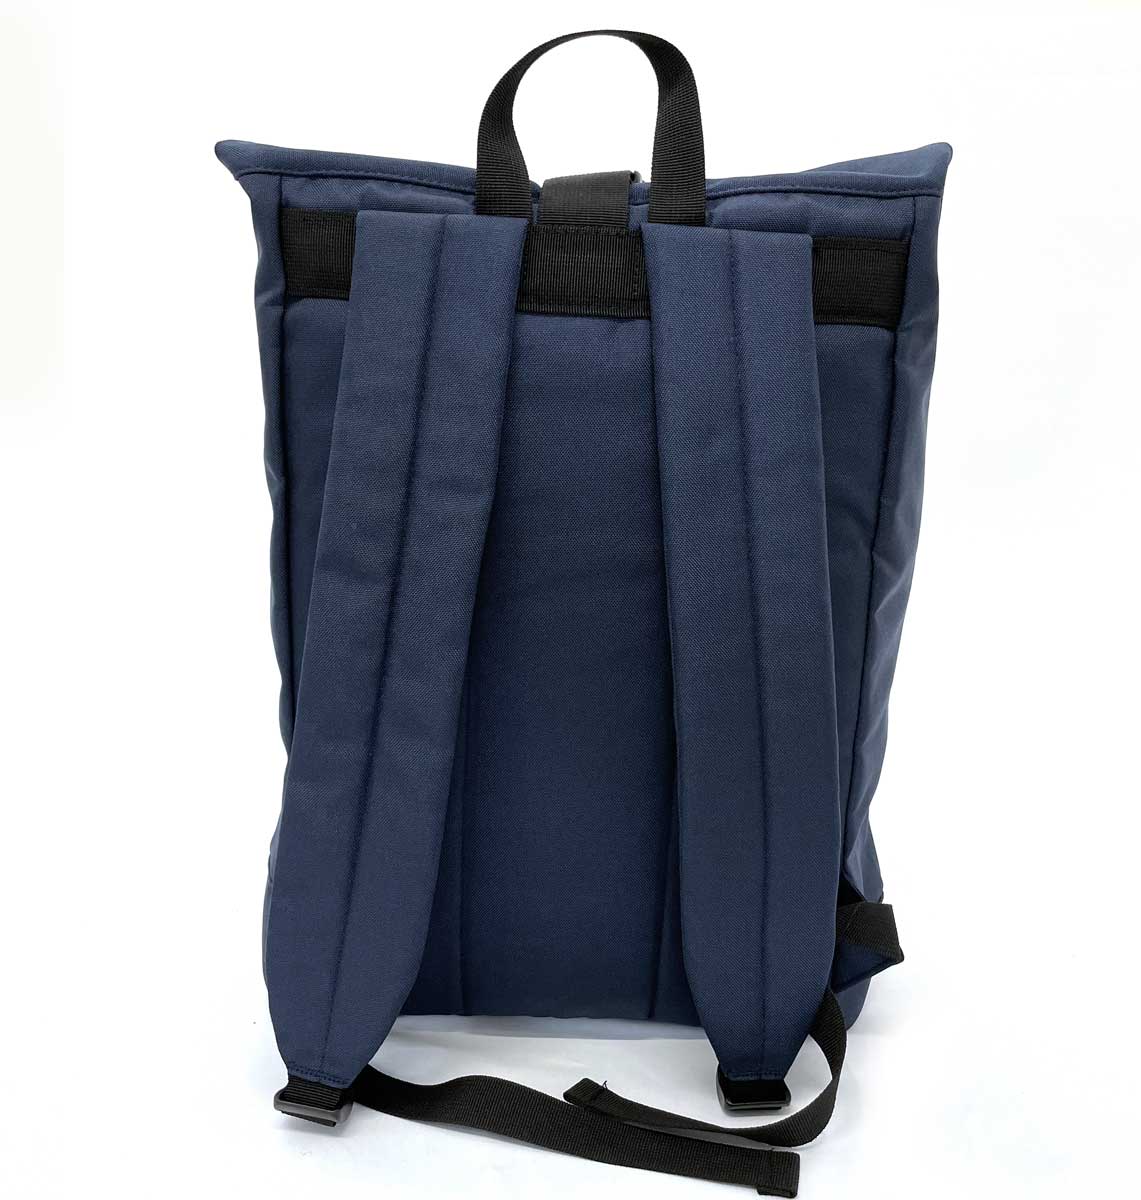 Bumble Bee Beach Roll-top Recycled Backpack - Blue Panda